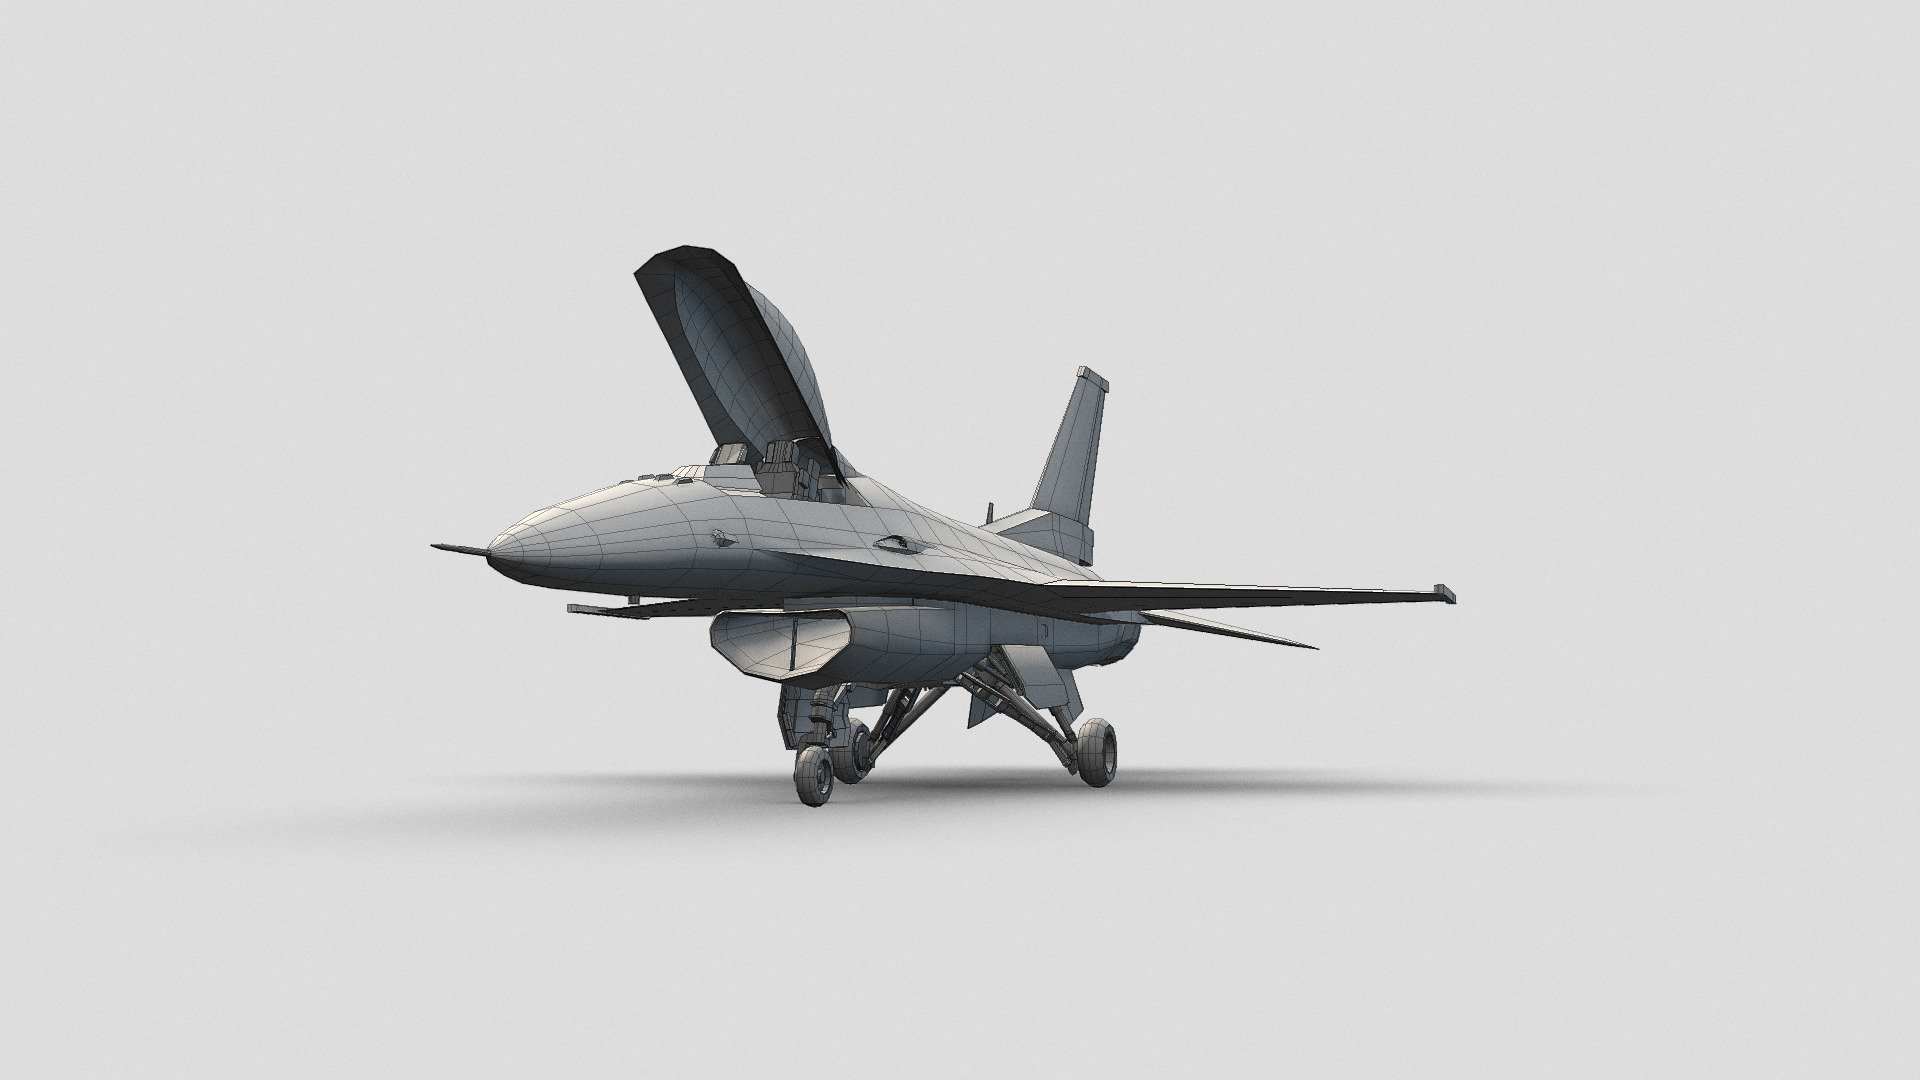 Here is a fully modelled and UV unwrapped F-16 model I’ve been making in blender. This version does not come with any textures. Feel free to downlod and use this model for whatever you would like. I hope you enjoy!! - F-16 Mesh (Posed) - Download Free 3D model by Jacobdesigns 3d model